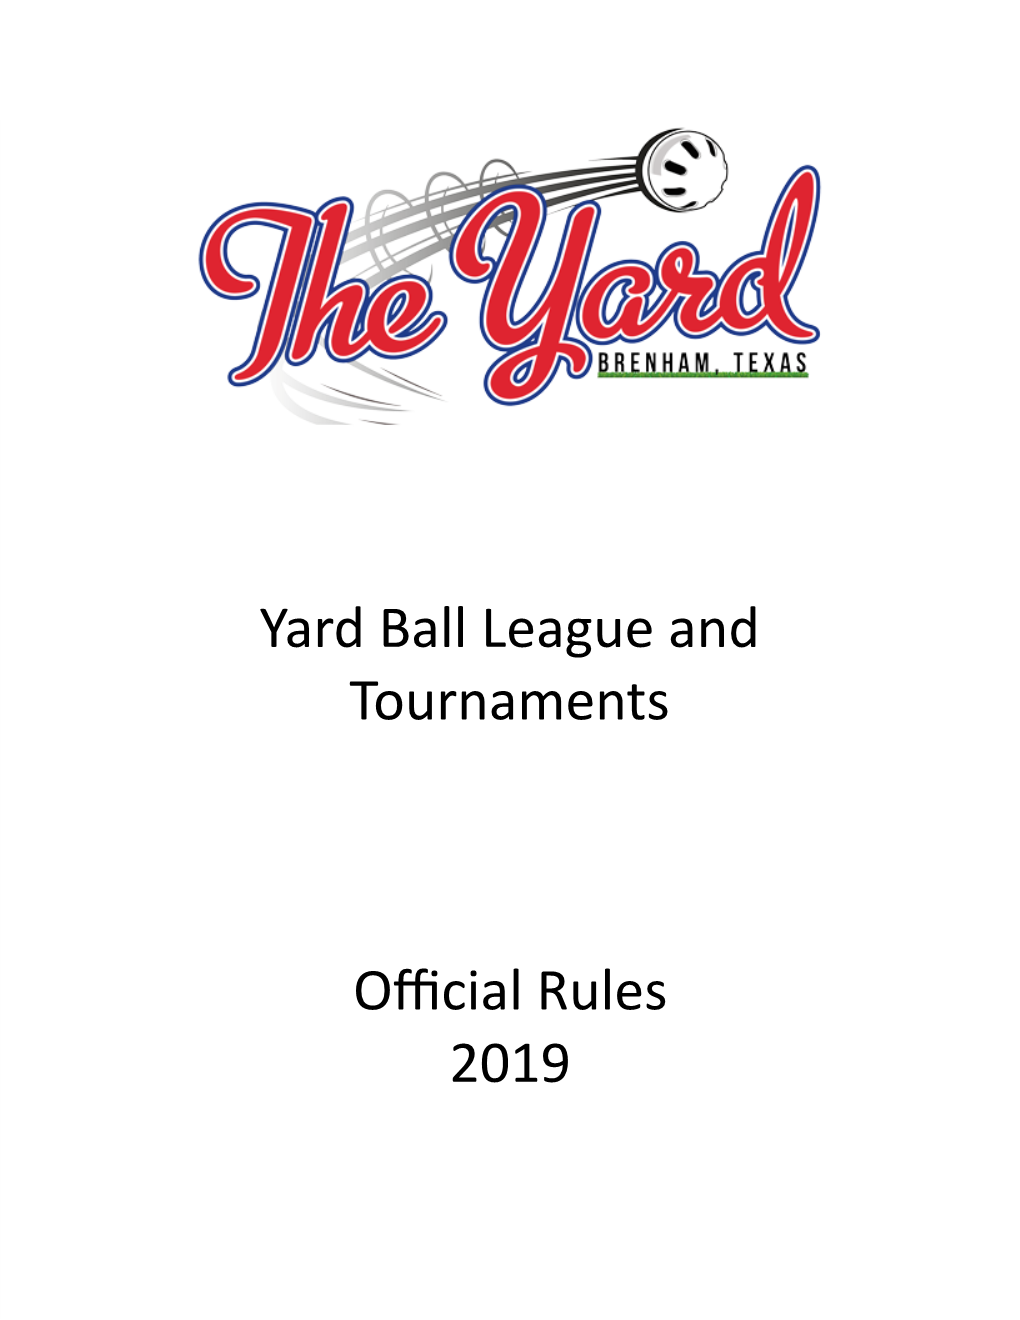 Yard Ball League and Tournaments Official Rules 2019